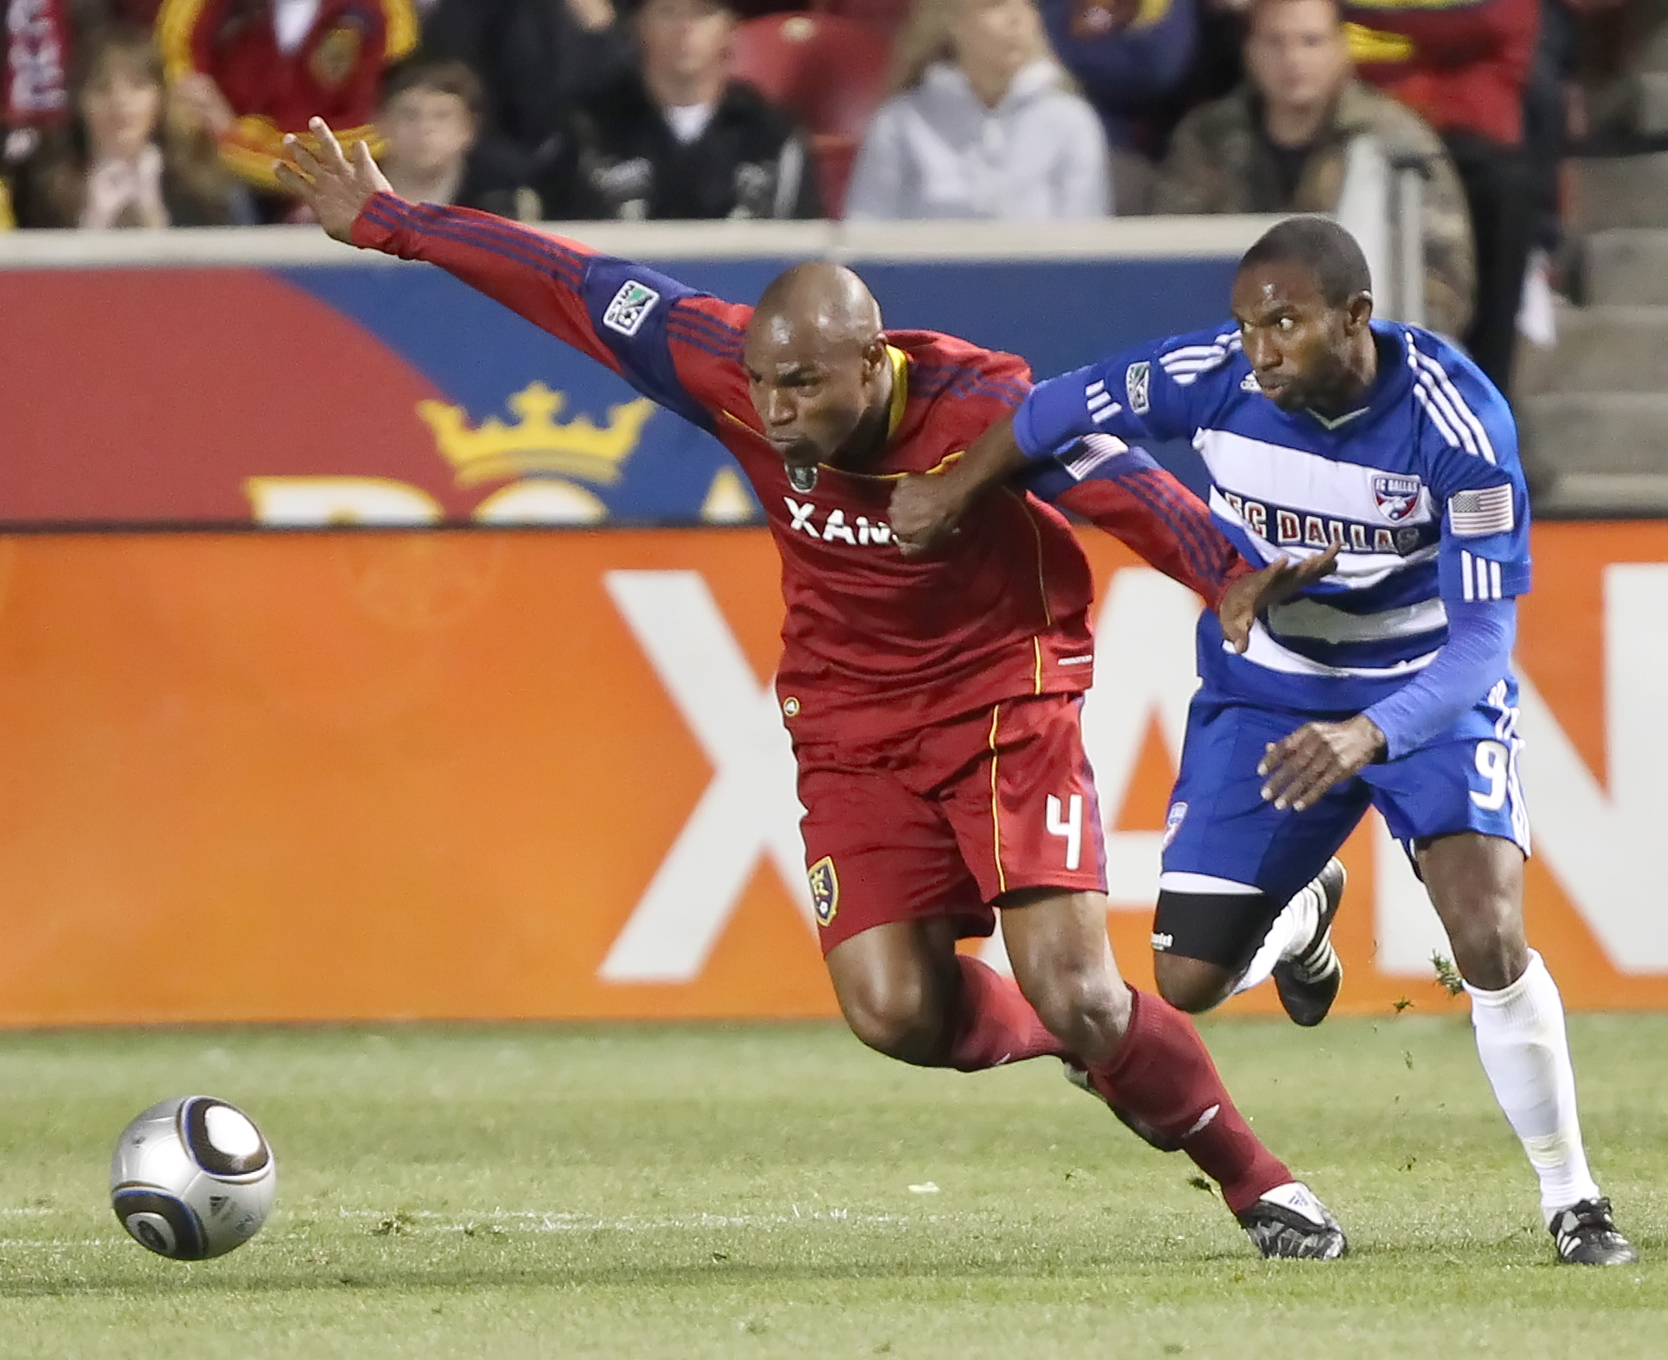 SANDY, UT - NOVEMBER 6: Jamison Olave #4 of Real Salt Lake and Jeff Cunningham #9 of FC Dallas fight for the ball during the first half of an MLS play off  game November 6, 2010 at Rio Tinto Stadium in Sandy, Utah.(Photo by George Frey/Getty Images)